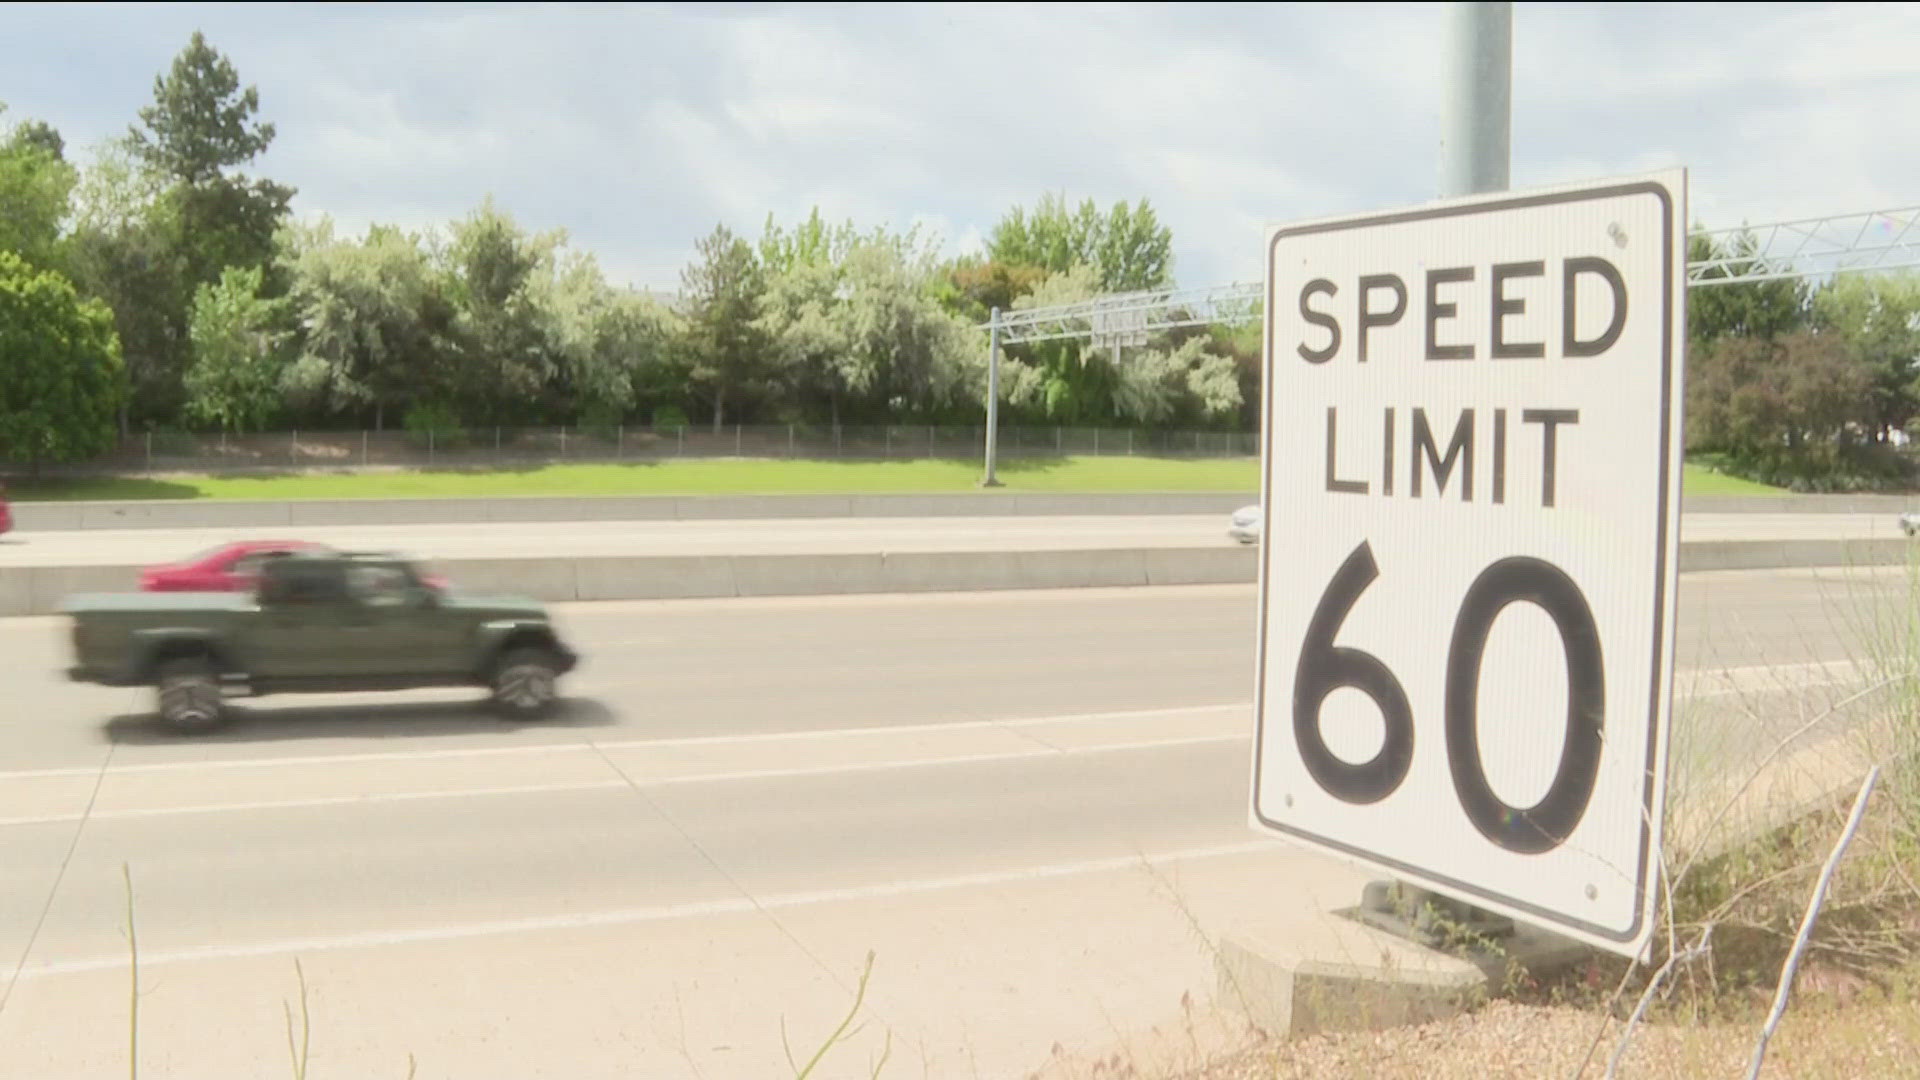 “Be cognizant of the fact that you are sharing the road with a lot of people that want to get home safely as well,” a spokesperson for AAA Idaho said.